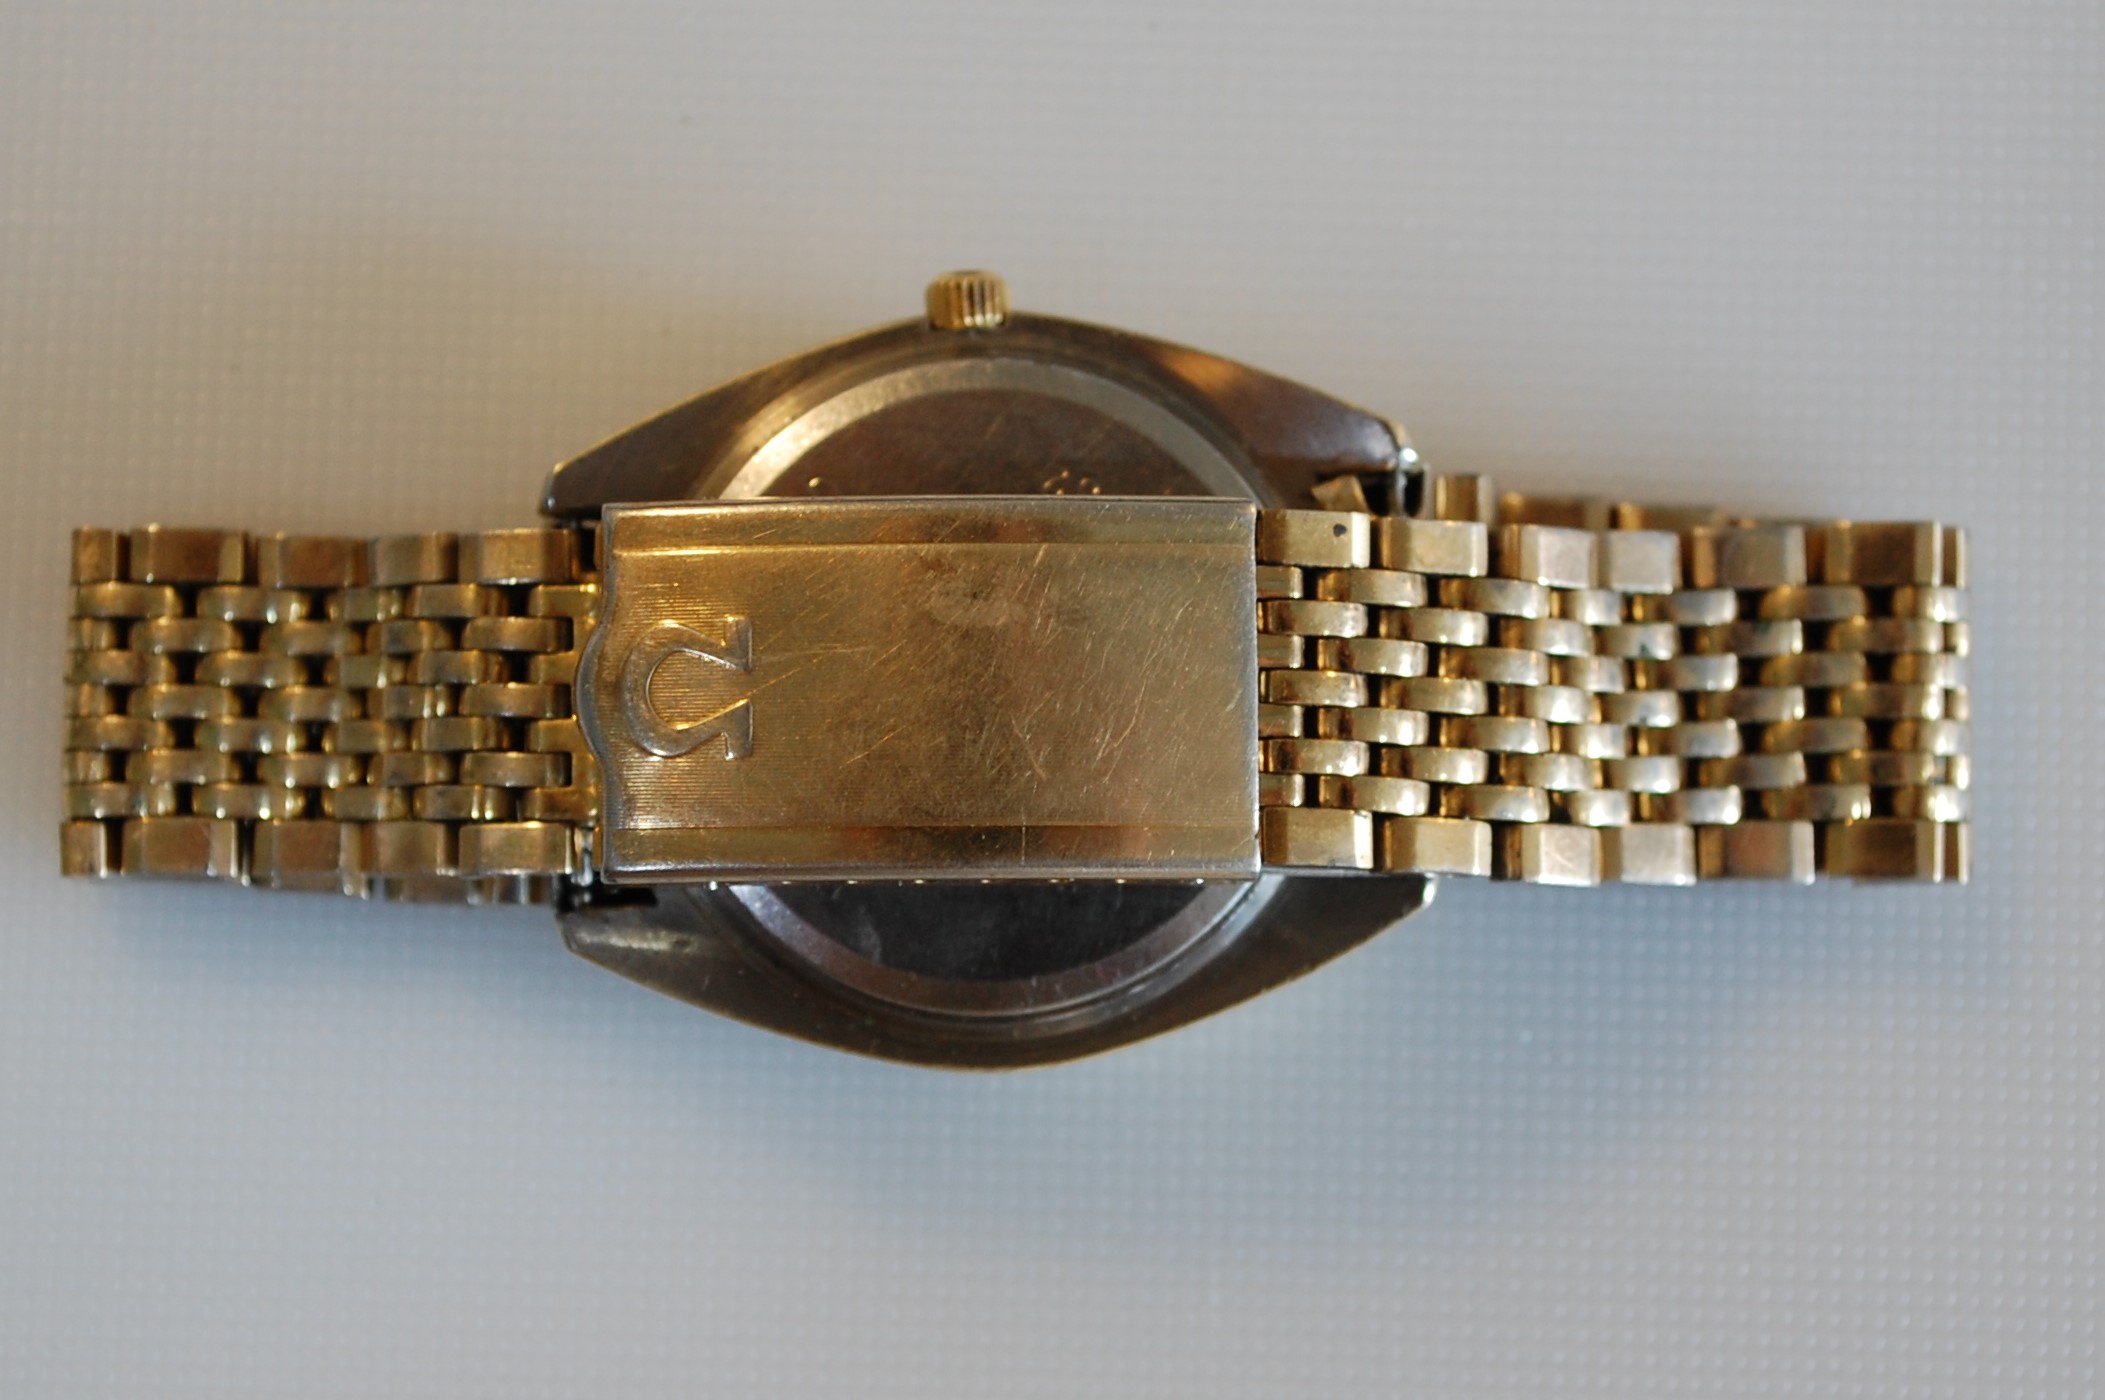 SOLD 1977 or 1982 Omega Constellation with box and papers - Birth 